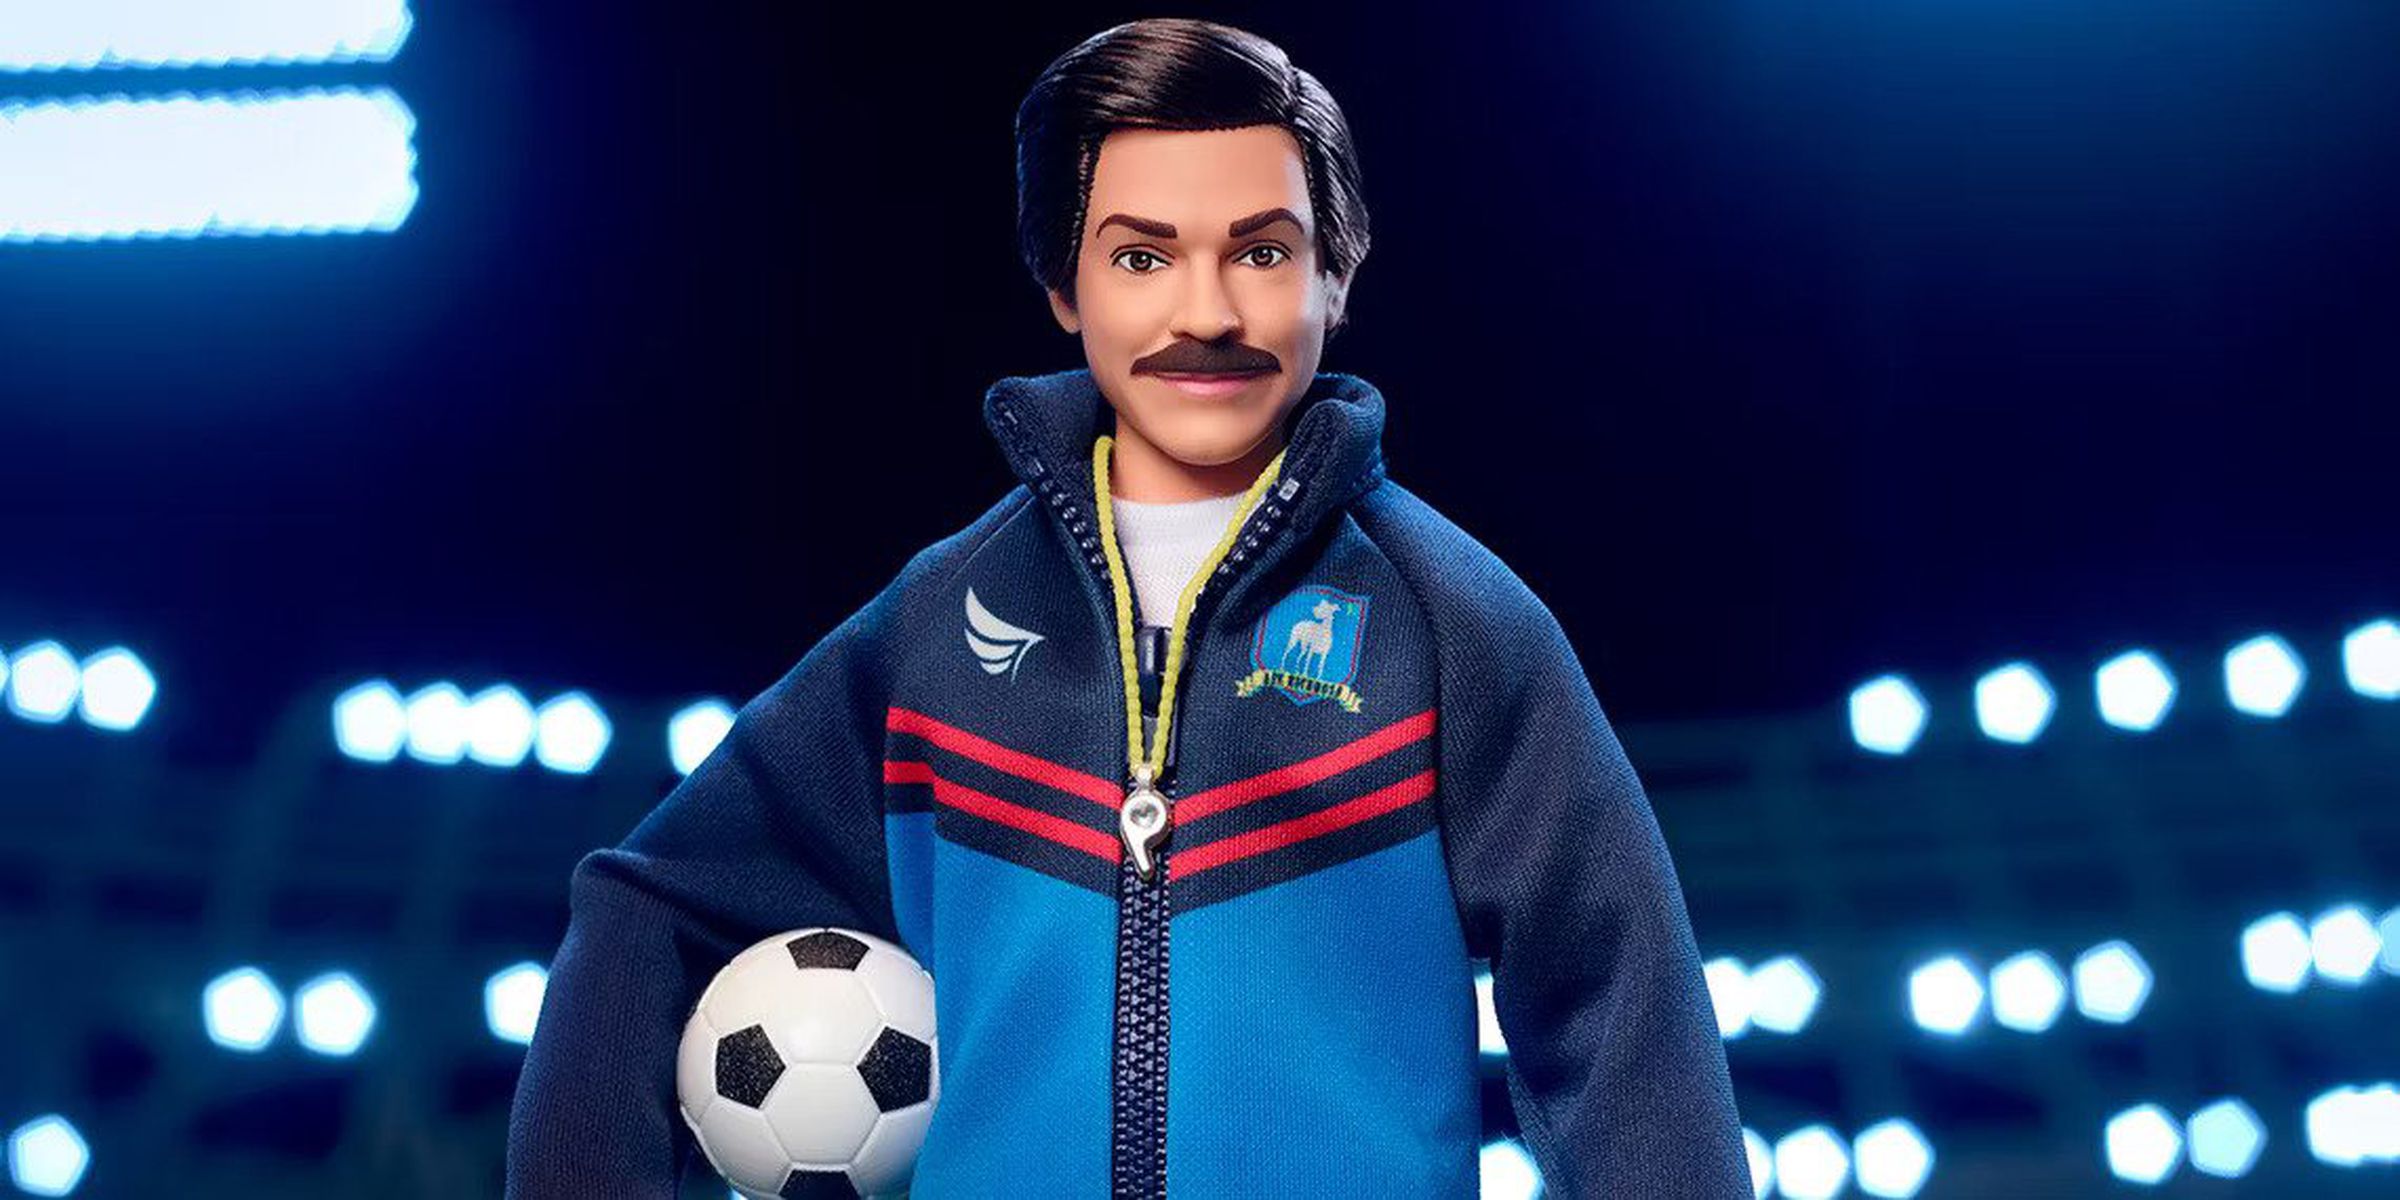 Image of the Ted Lasso Barbie featuring actor Jason Sudeikis as his character soccer coach Ted Lasso wearing a blue jacket and holding a soccer ball.